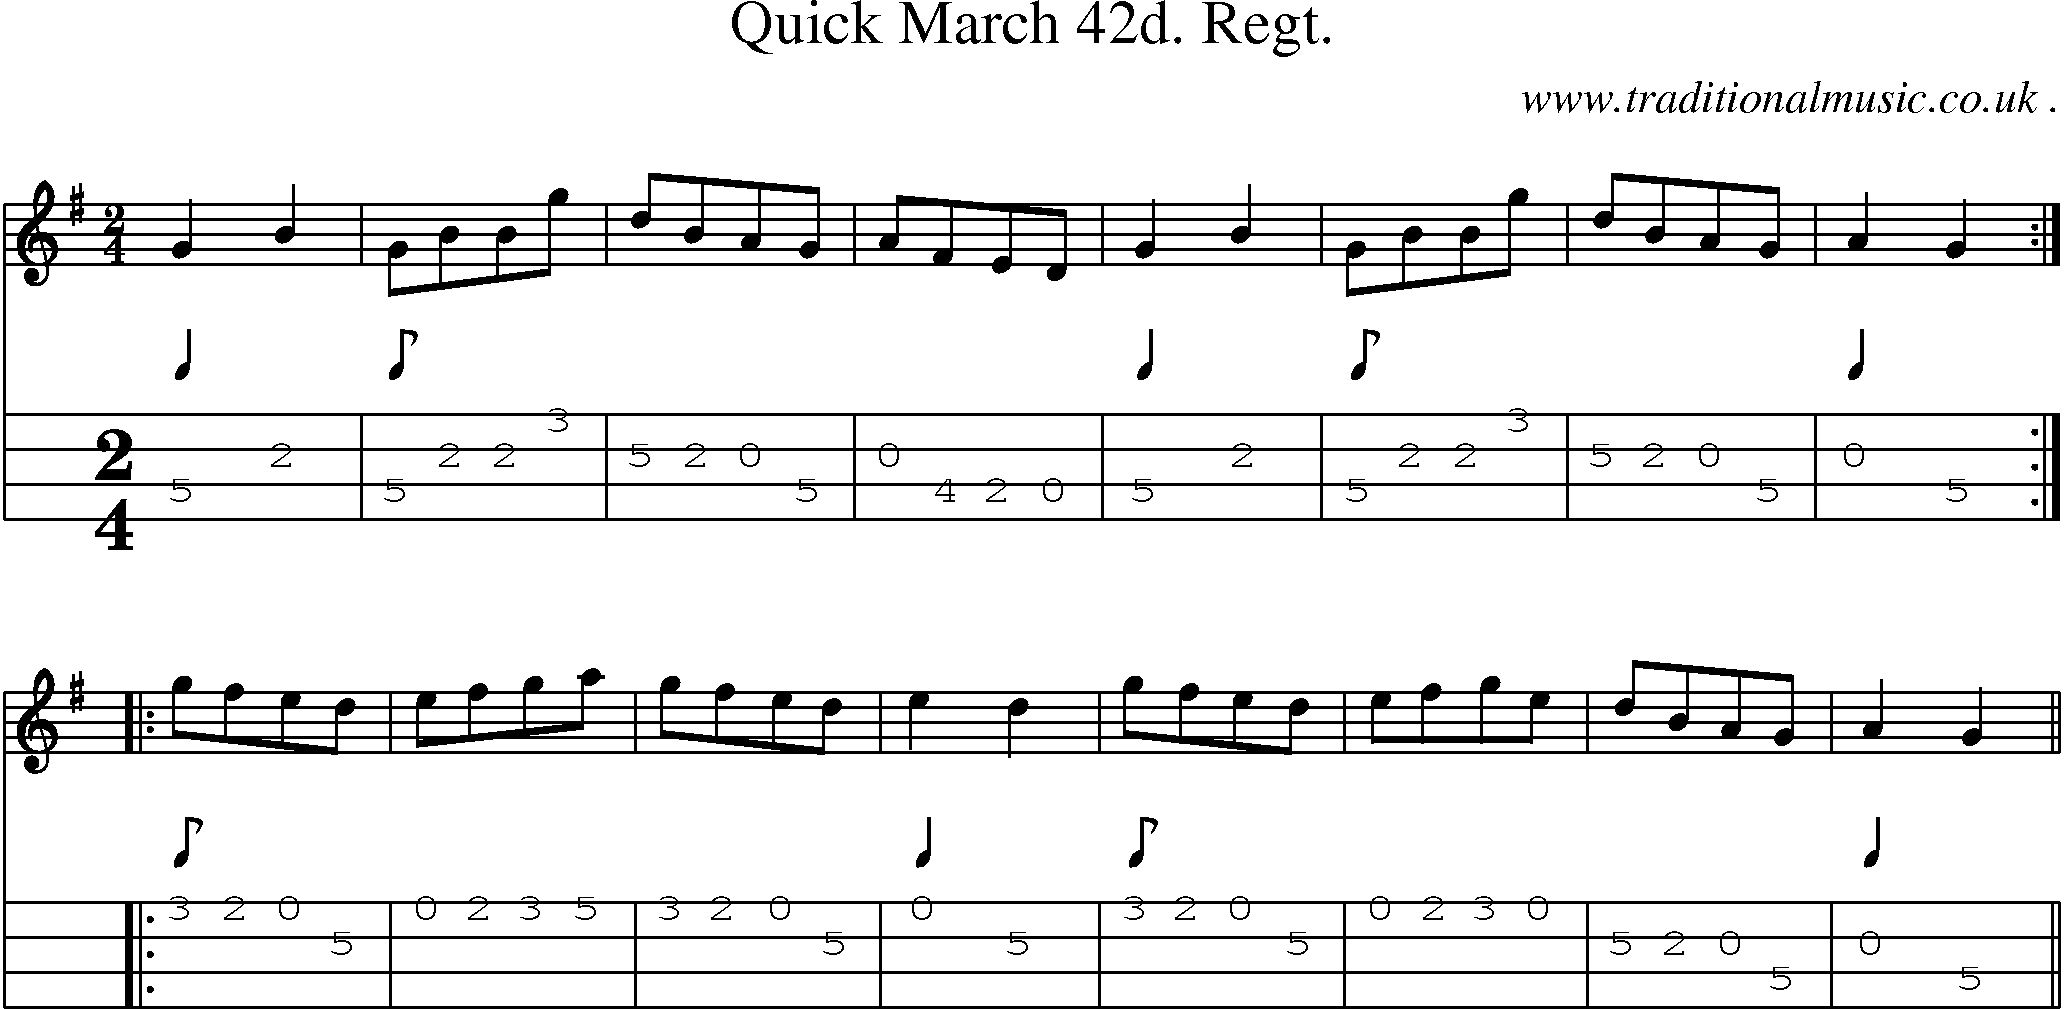 Sheet-music  score, Chords and Mandolin Tabs for Quick March 42d Regt